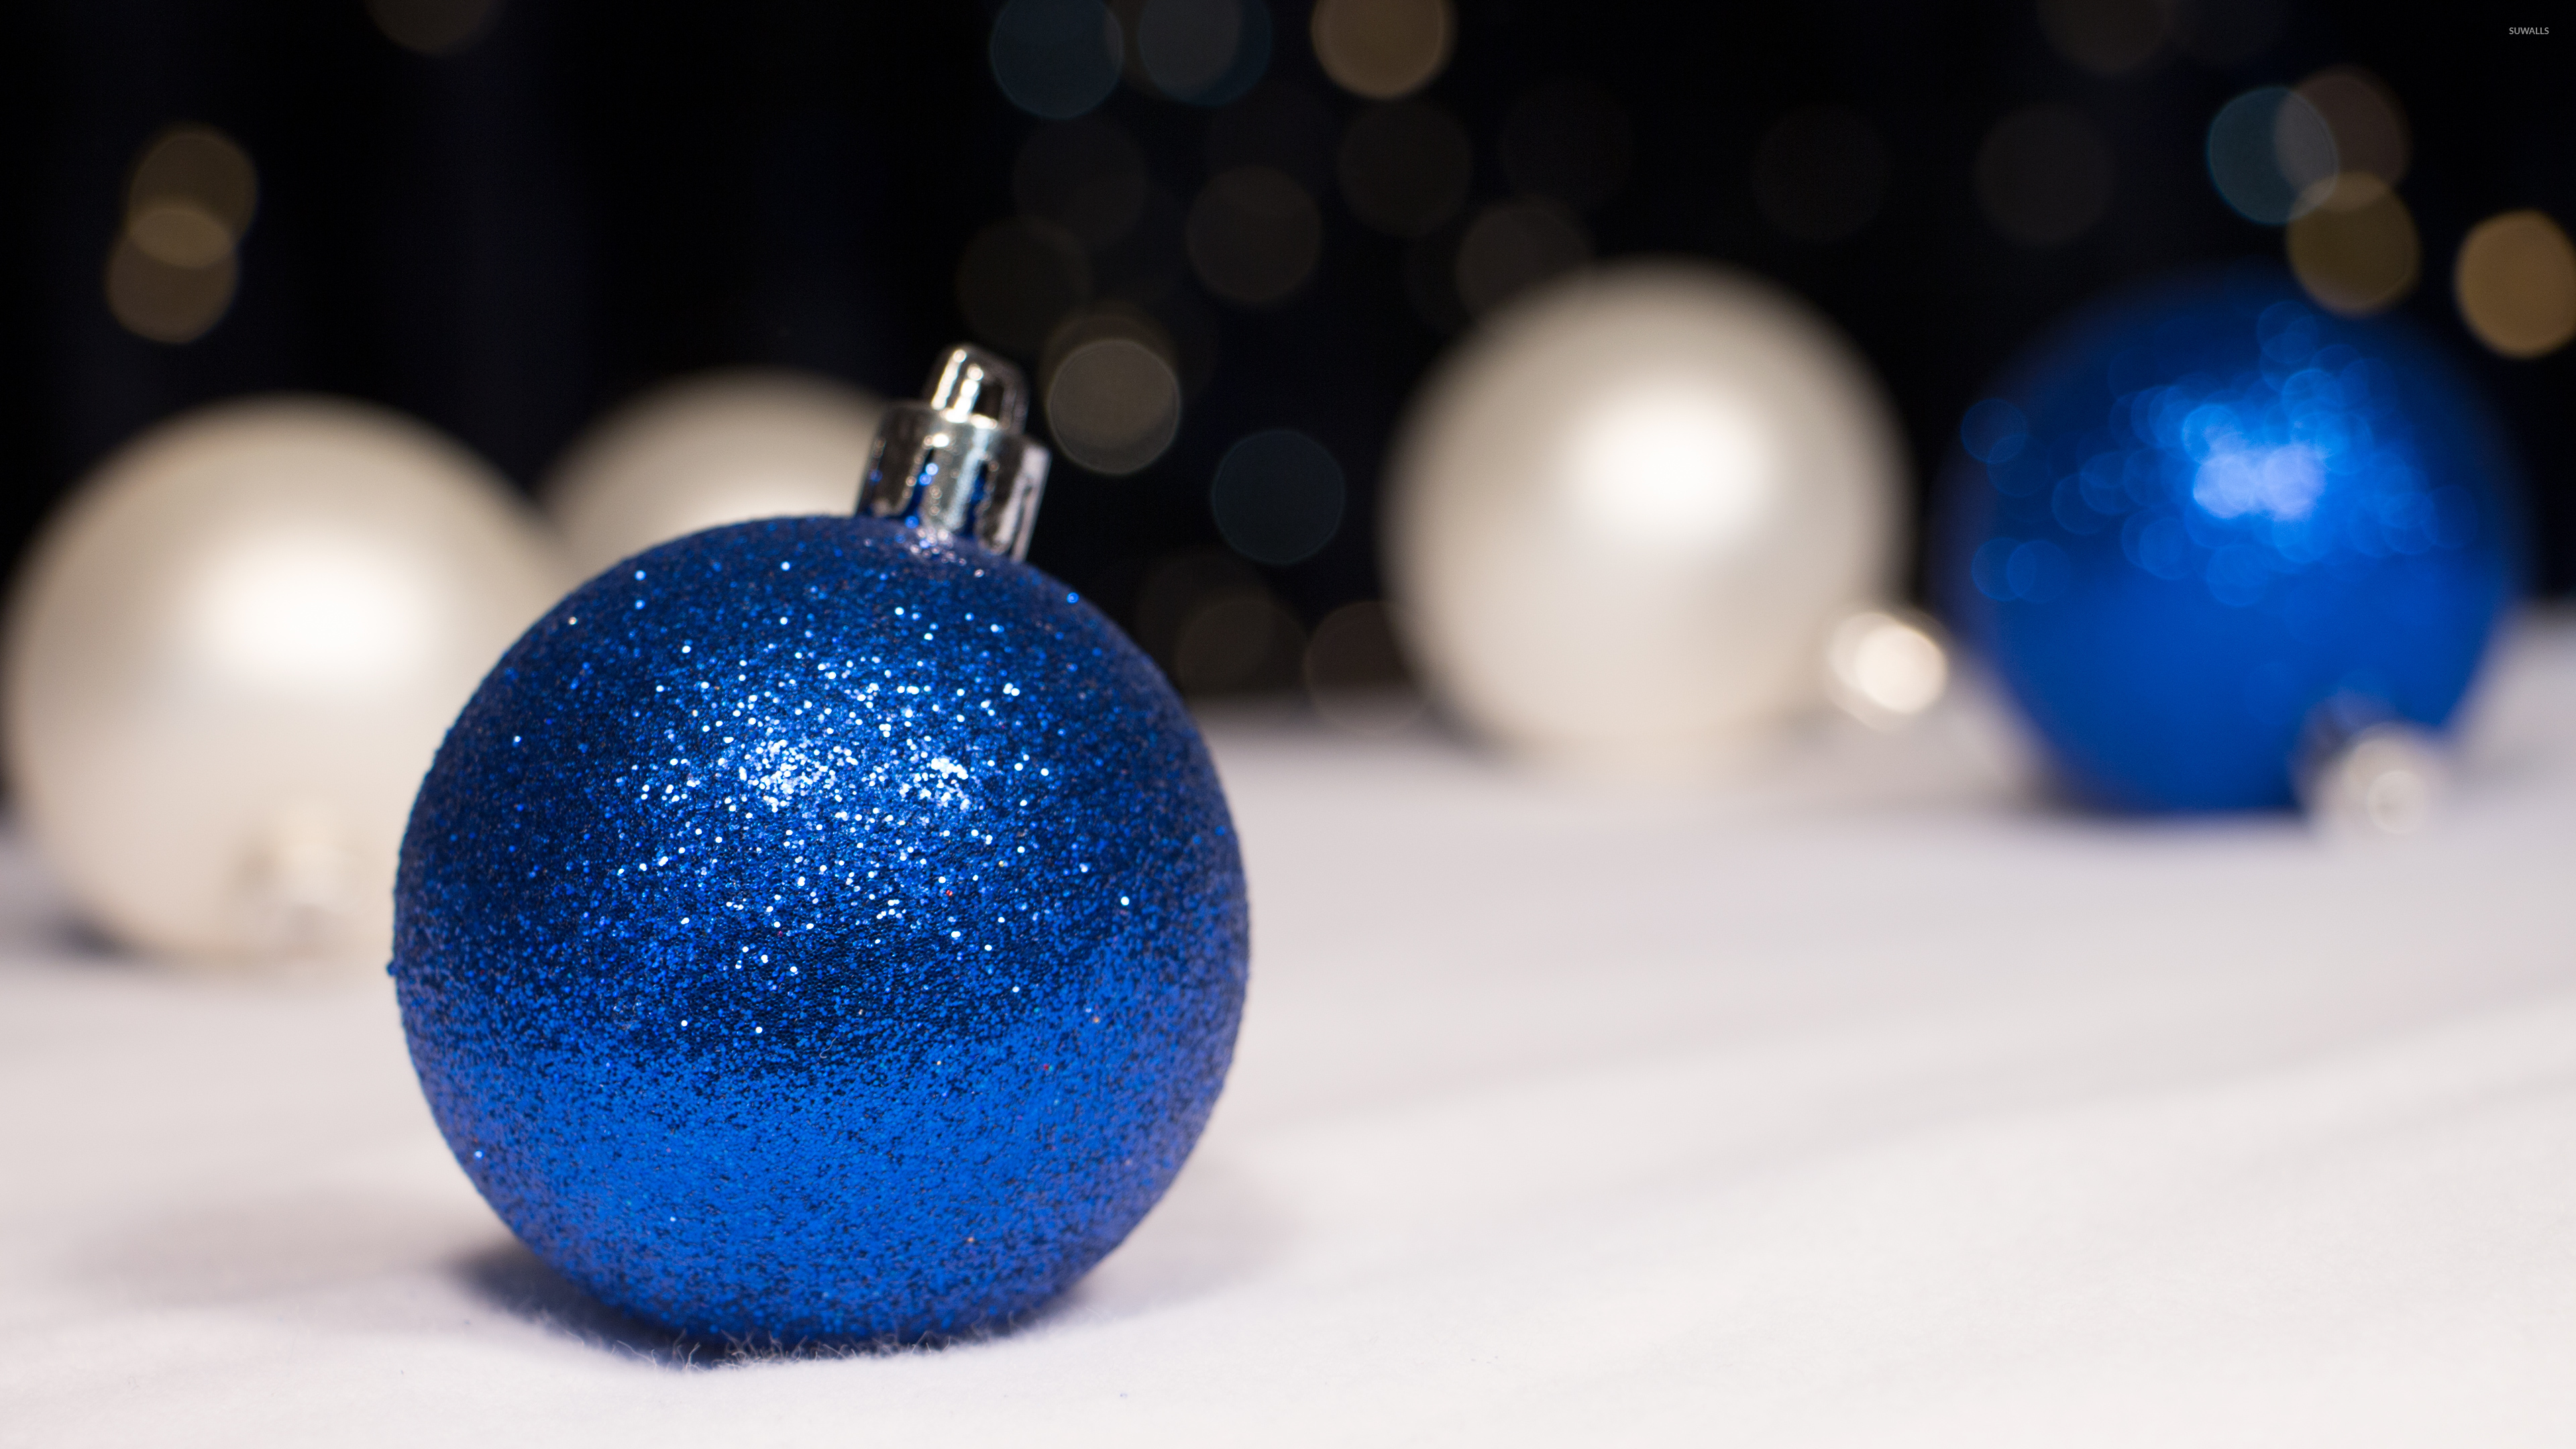 Blue sparkly ornament wallpaper - Holiday wallpapers - #51191